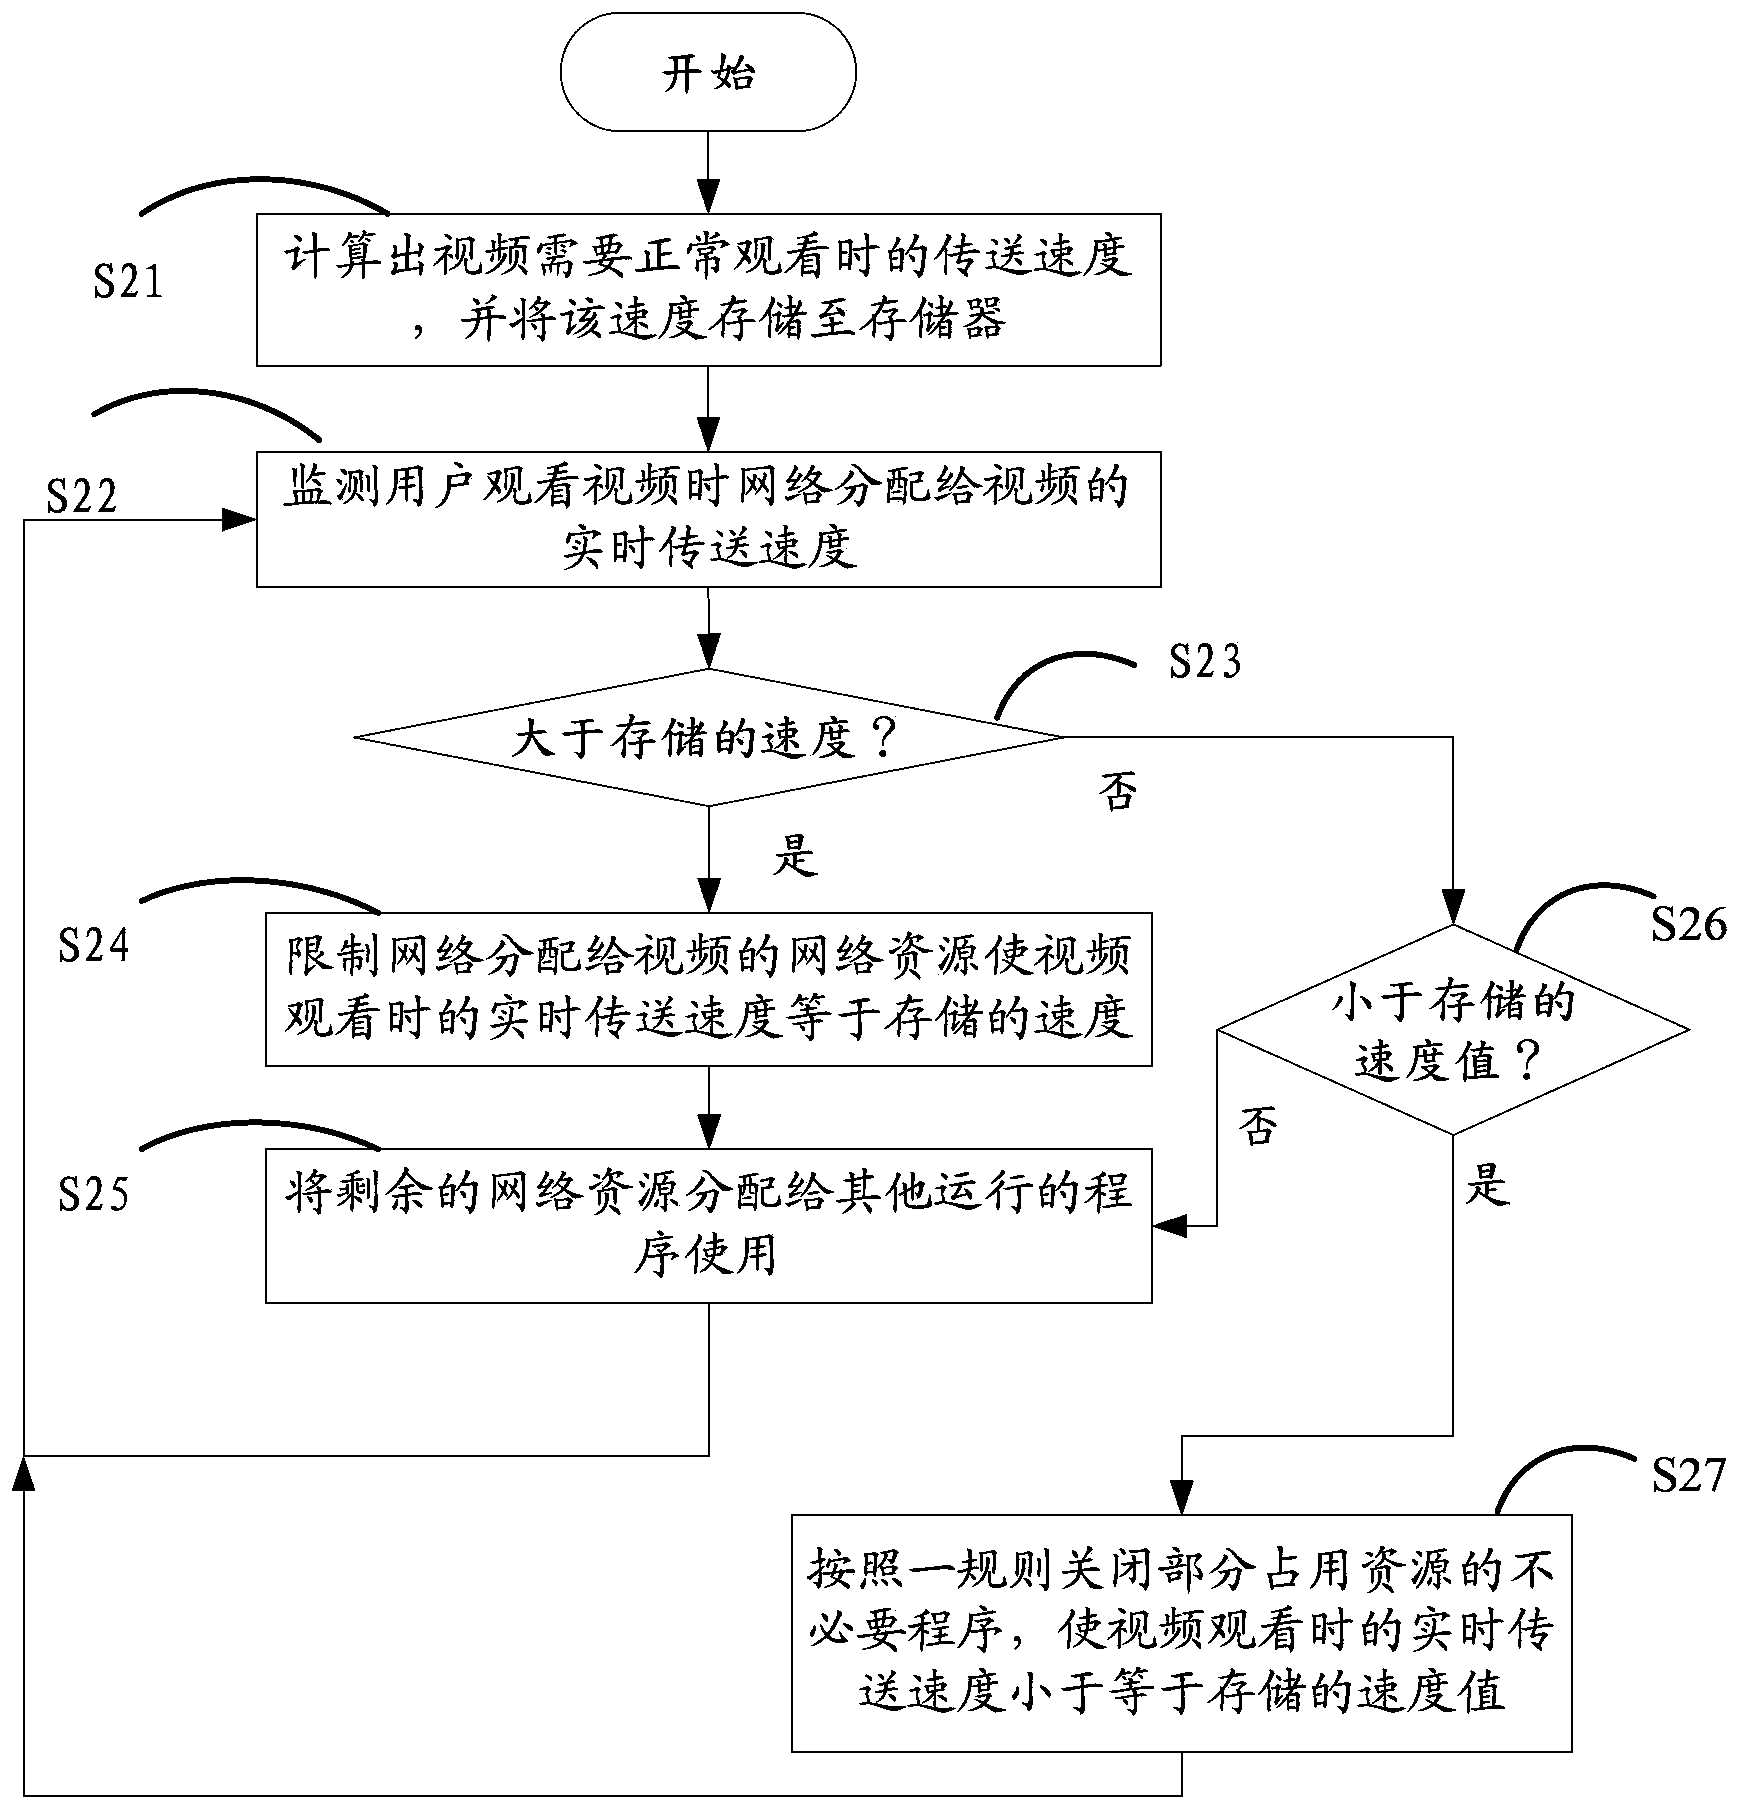 Network flow distribution system and method